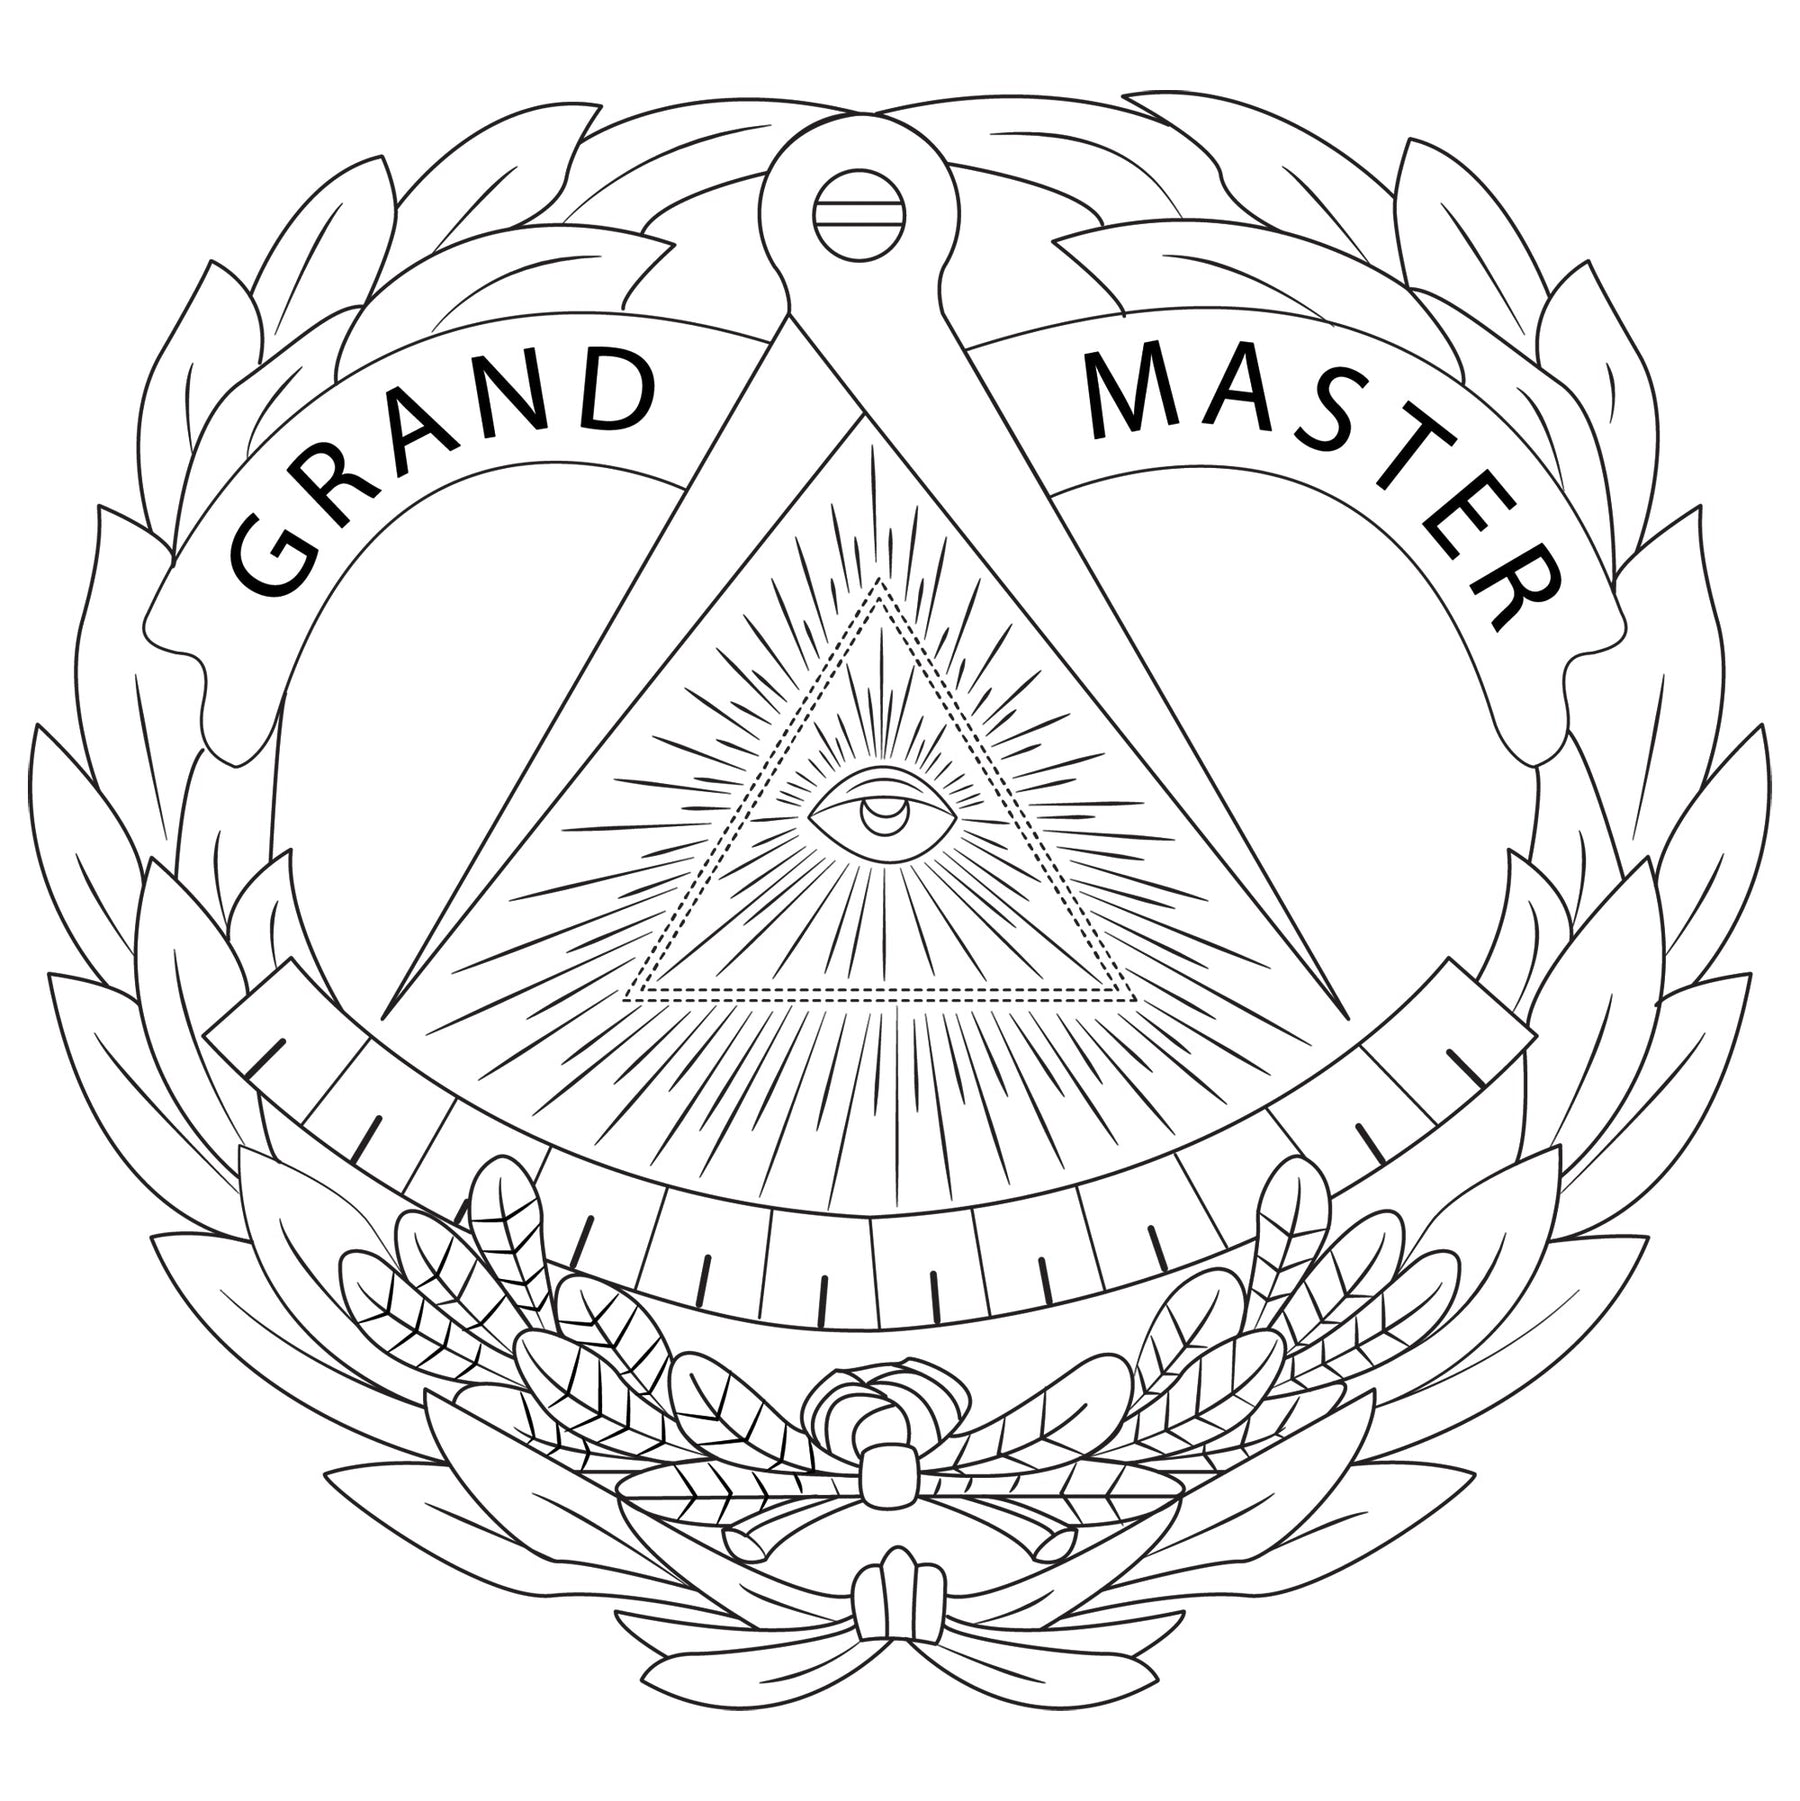 Grand Master Blue Lodge Necklace - Various Stainless Steel Colors - Bricks Masons